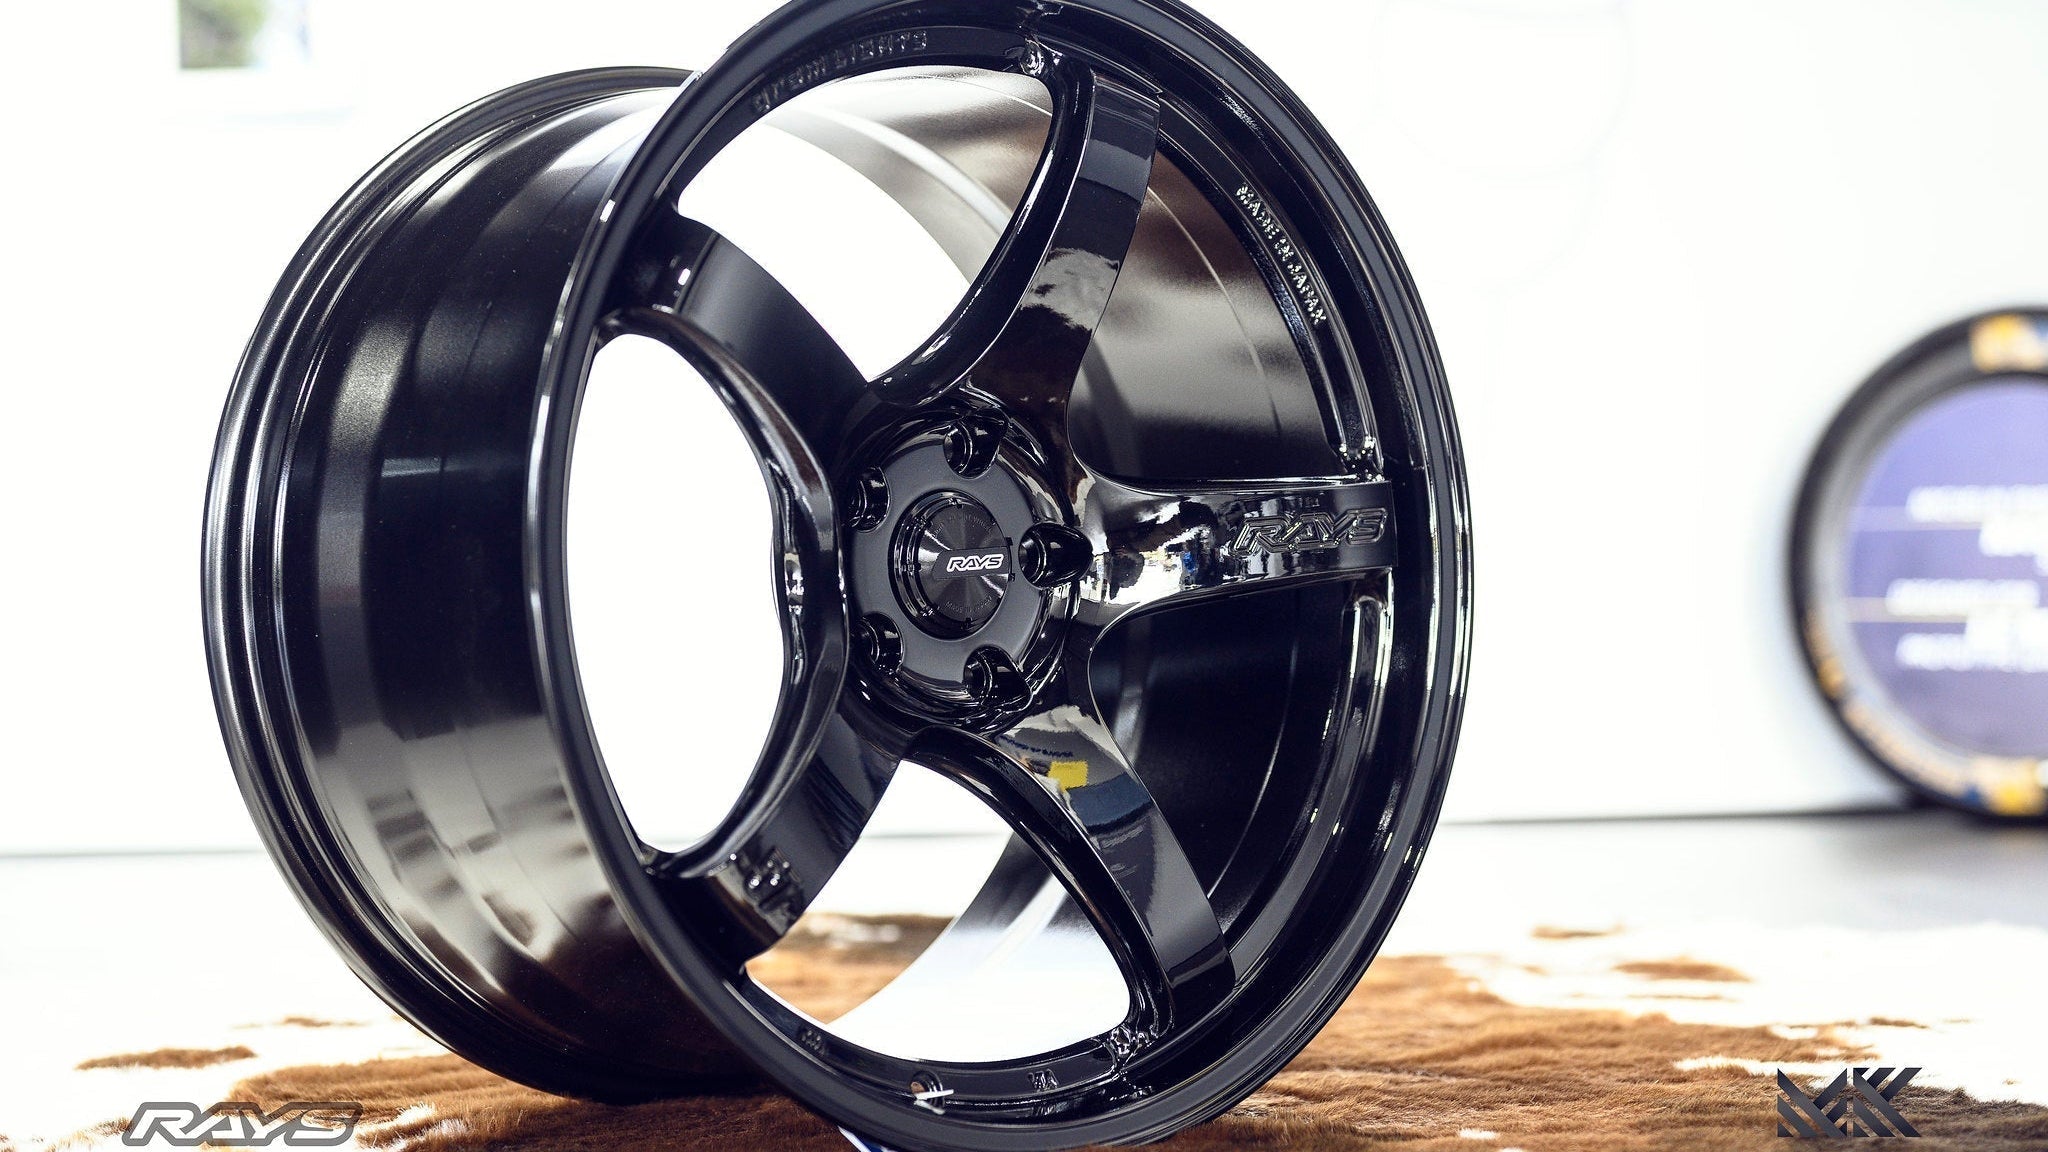 gramLIGHTS 57CR 17" - Premium Wheels from Gram Lights - From just $2000.0! Shop now at MK MOTORSPORTS